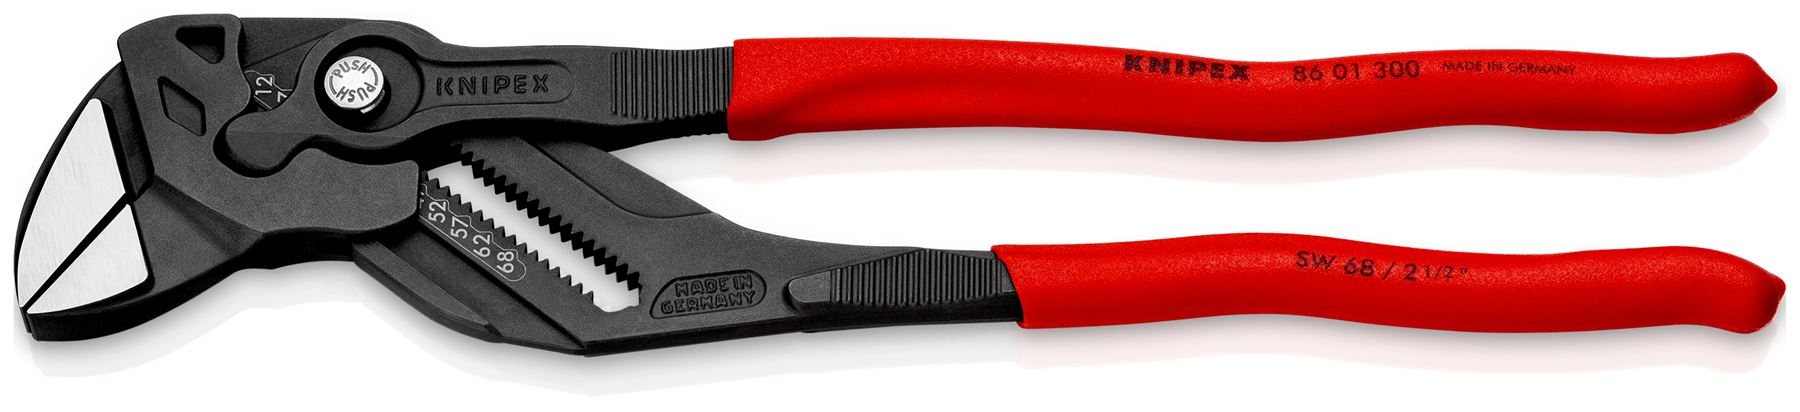 KNIPEX Pliers Wrench Slip Joint Plier 300mm Plastic Coated Handles Non Slip 86 01 300 SB